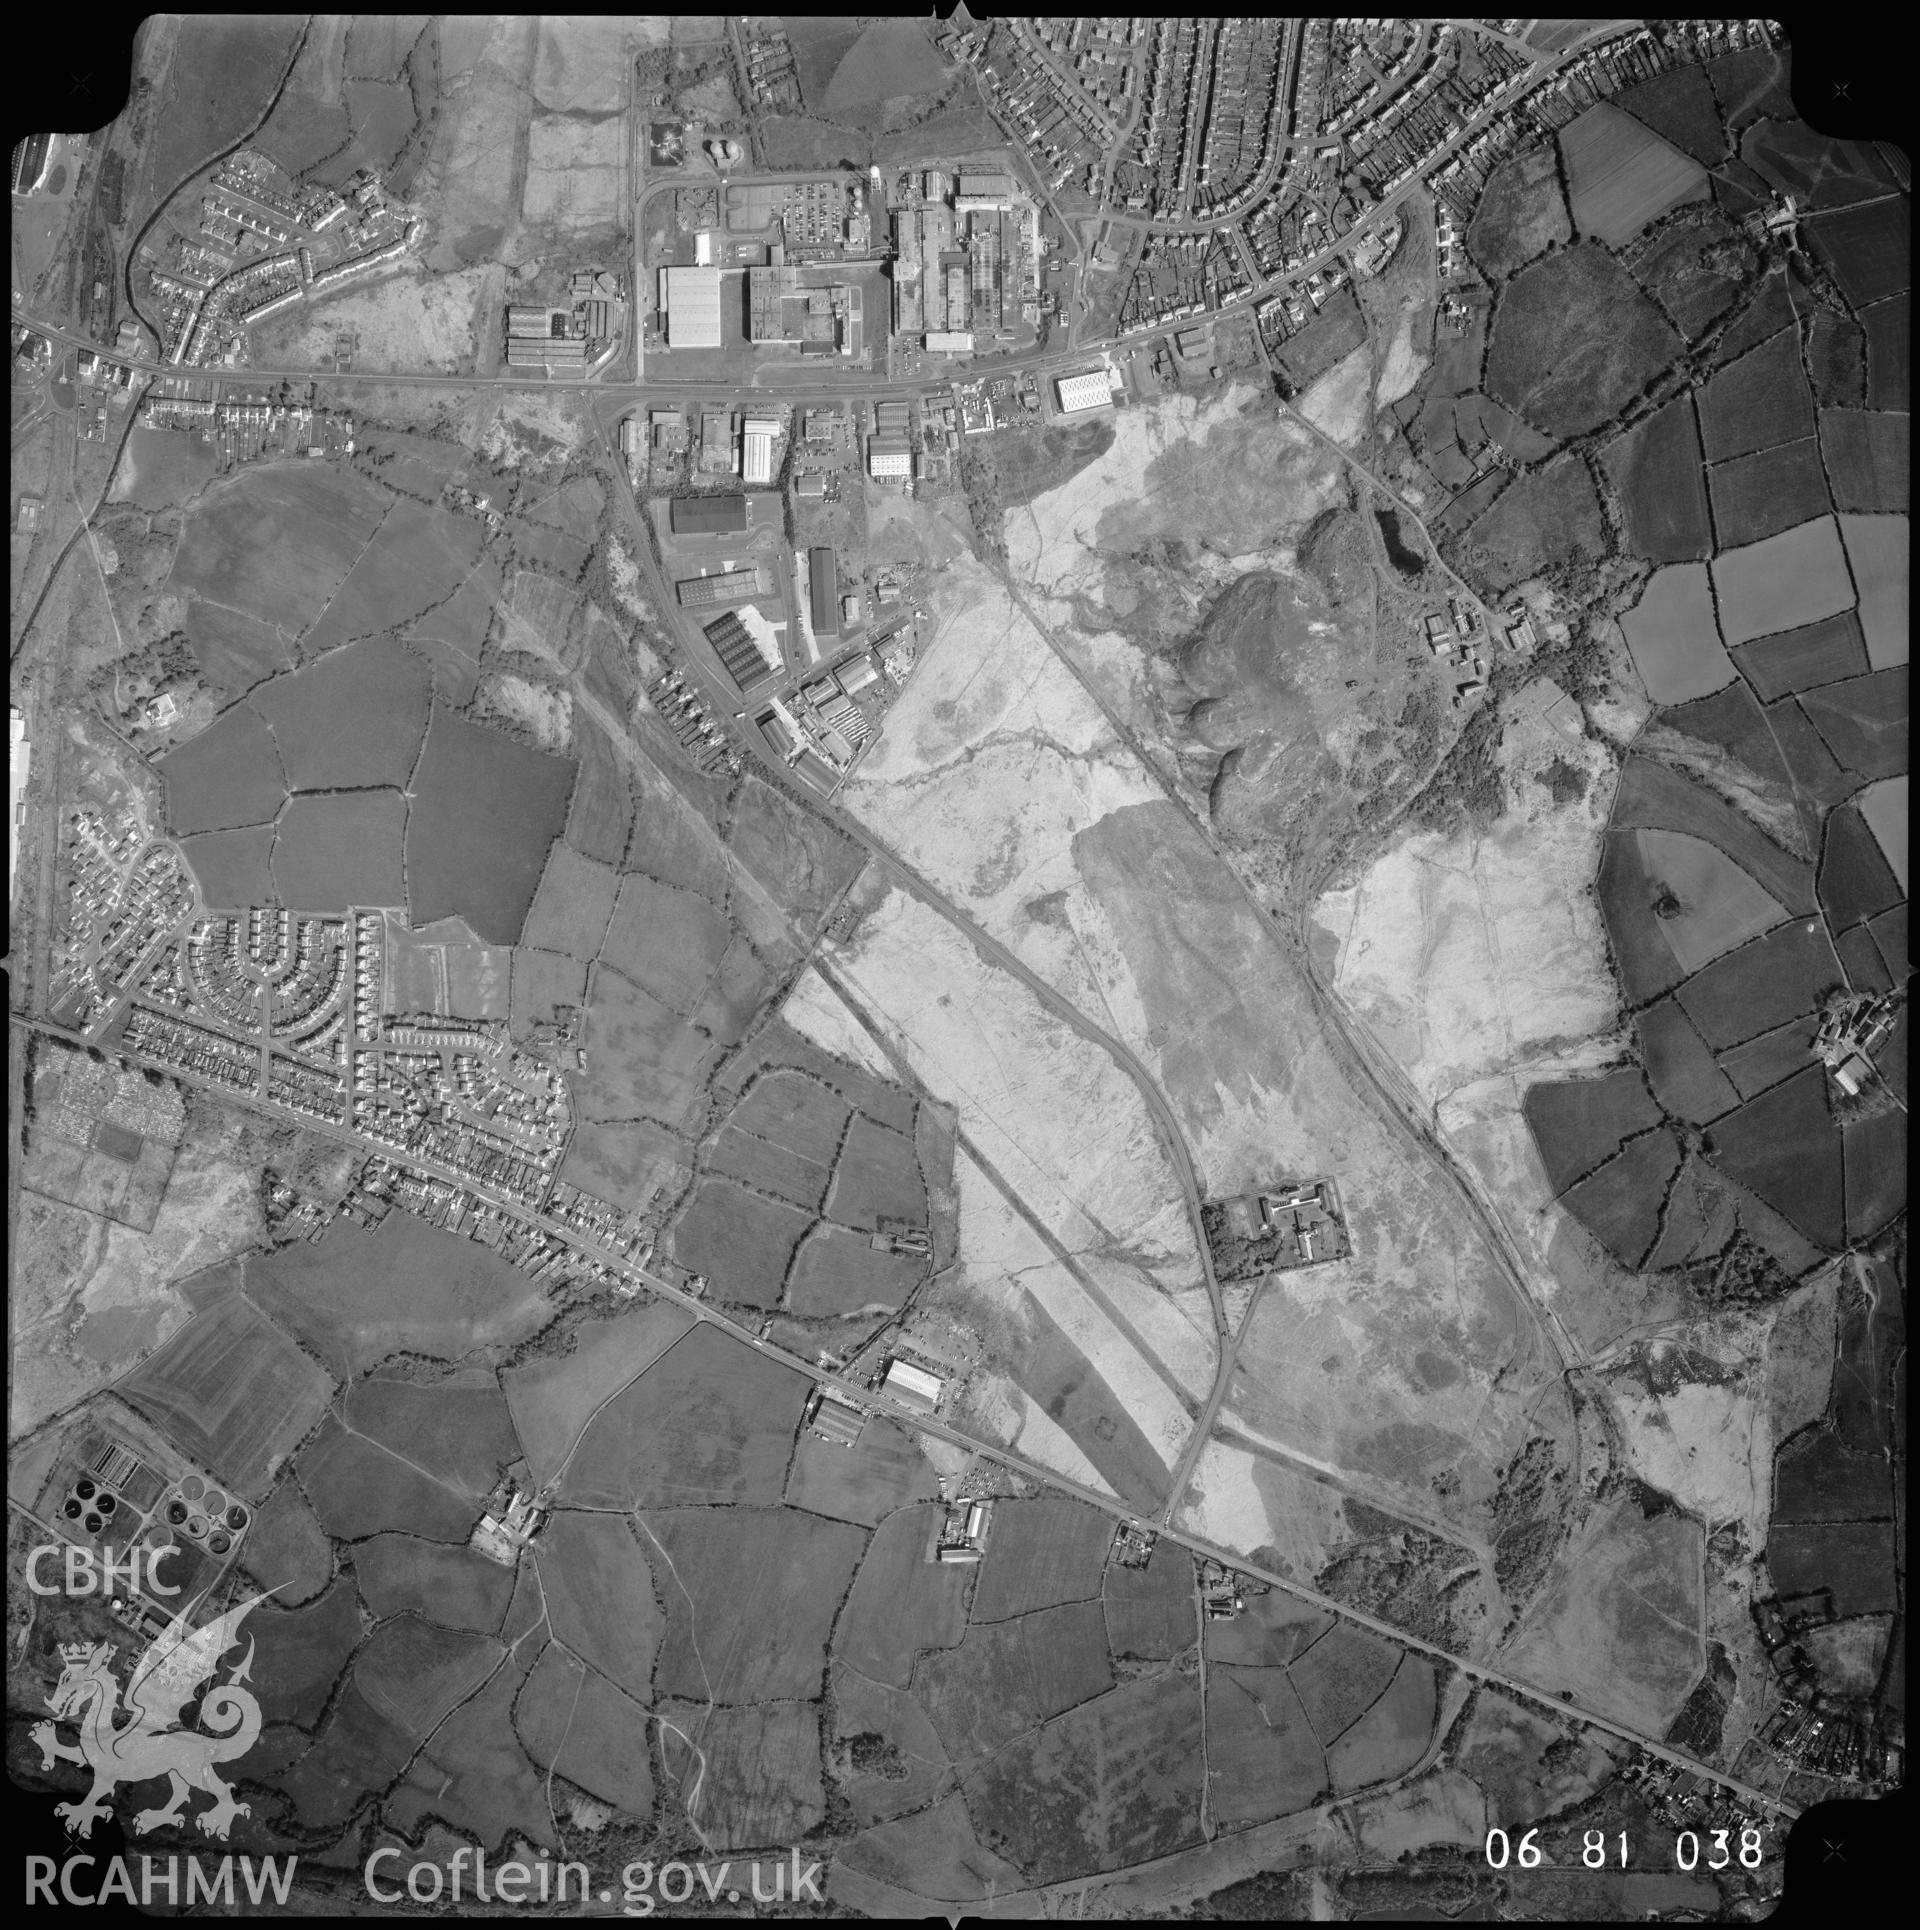 Black and white aerial photograph taken in April 1981. Part of material used in a Setting Impact Assessment of Land off Phoenix Way, Garngoch Business Village, Swansea, carried out by Archaeology Wales, 2018. Project number P2631.